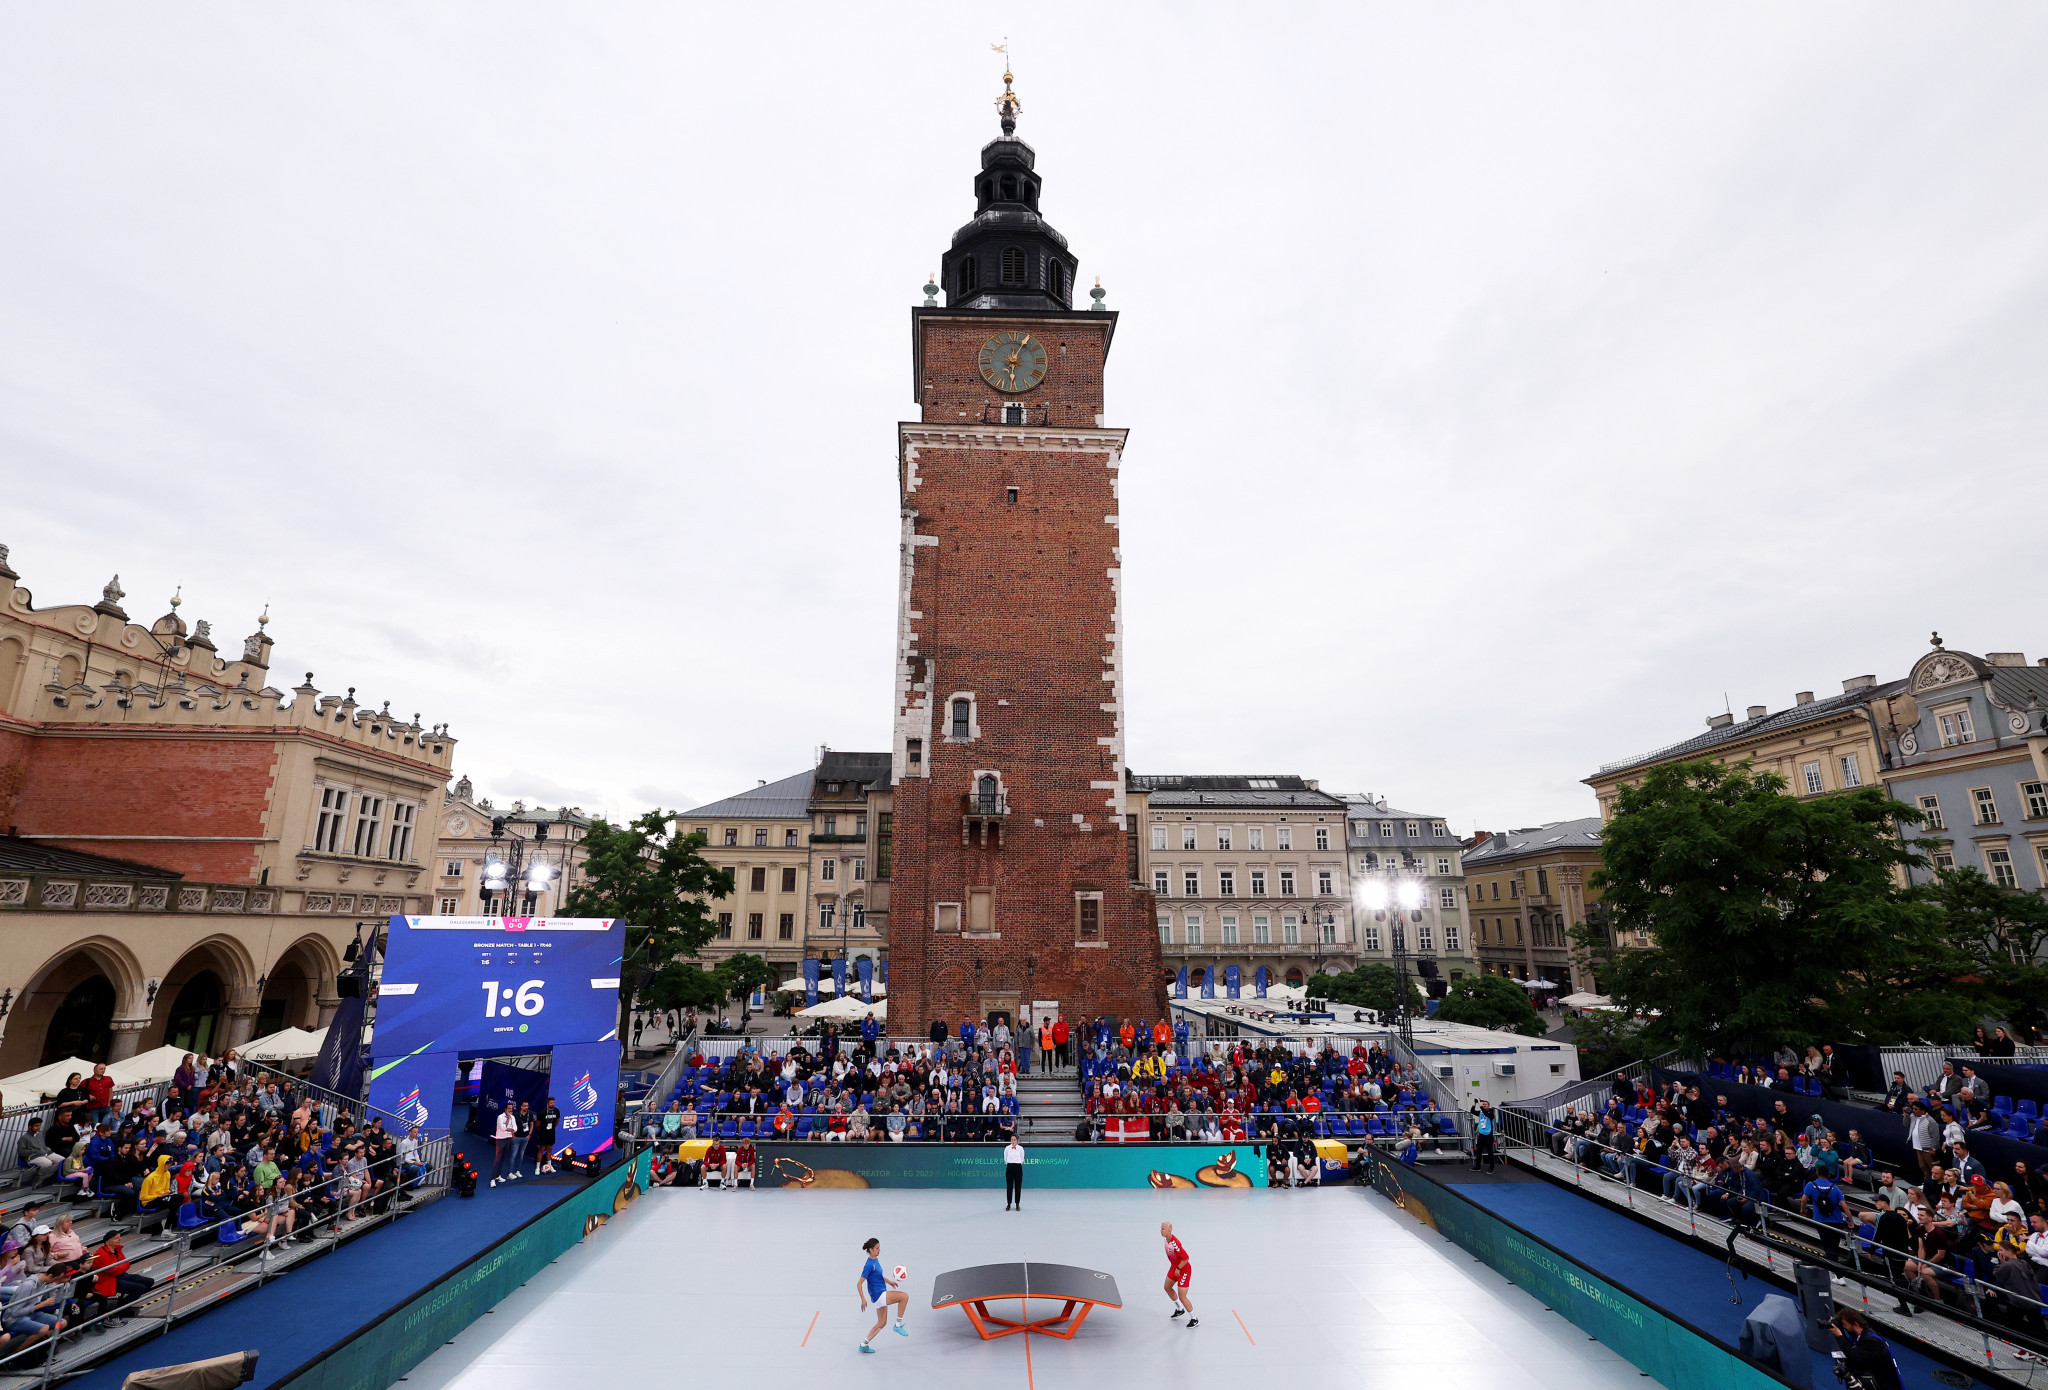 Kraków-Małopolska 2023 has claimed the European Games "contributed" to a boost in tourist numbers in the region ©Getty Images